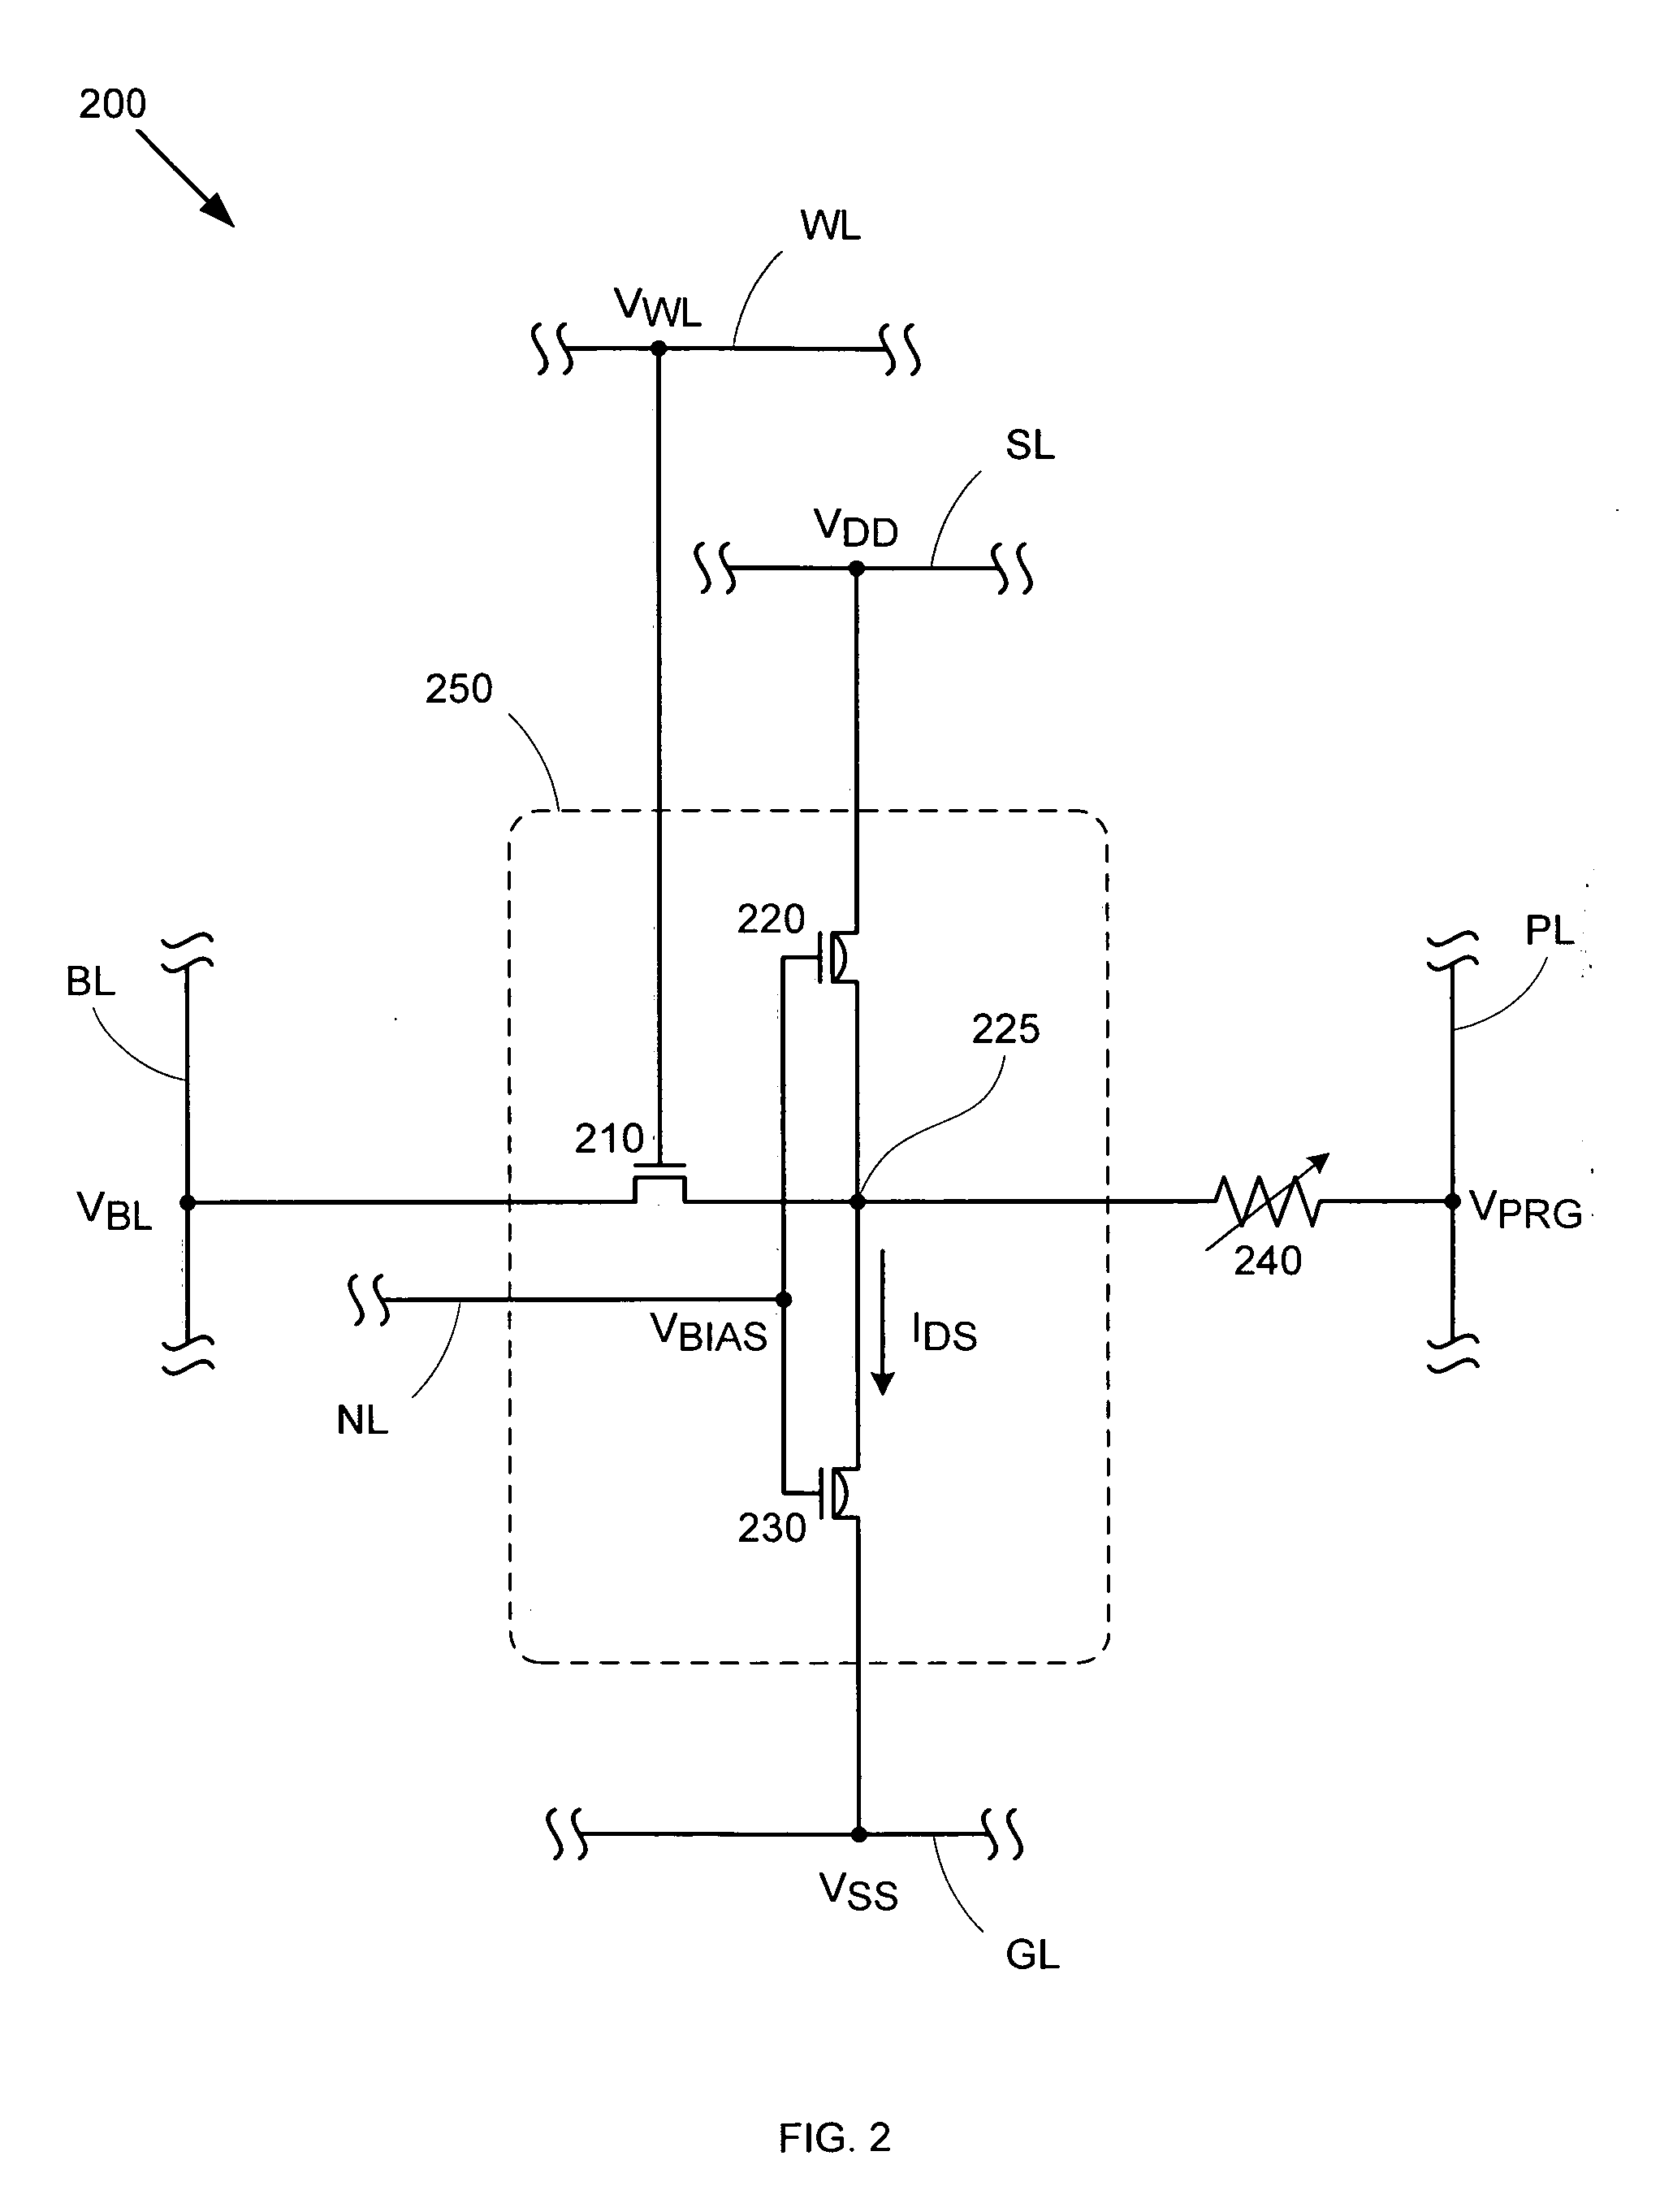 Compact static memory cell with non-volatile storage capability